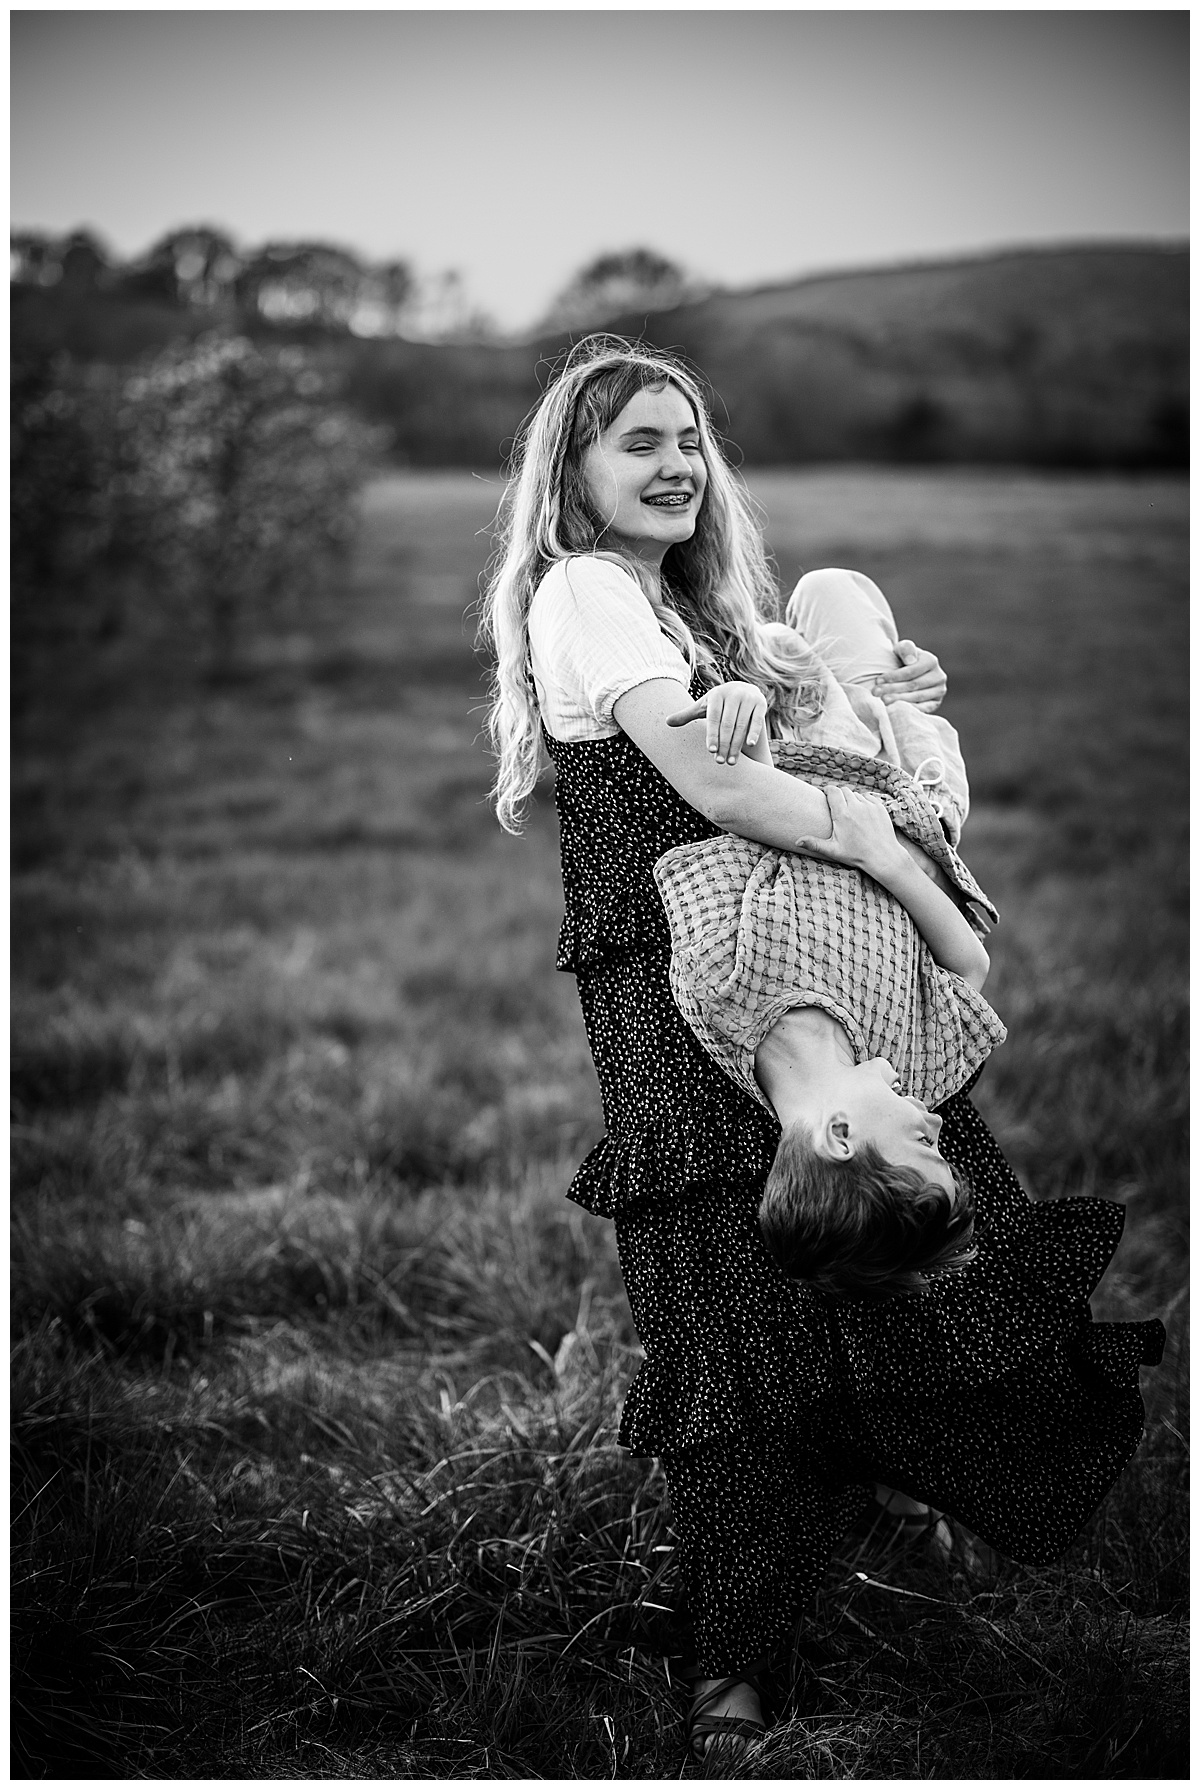 Sister plays together for Virginia Family Photographer